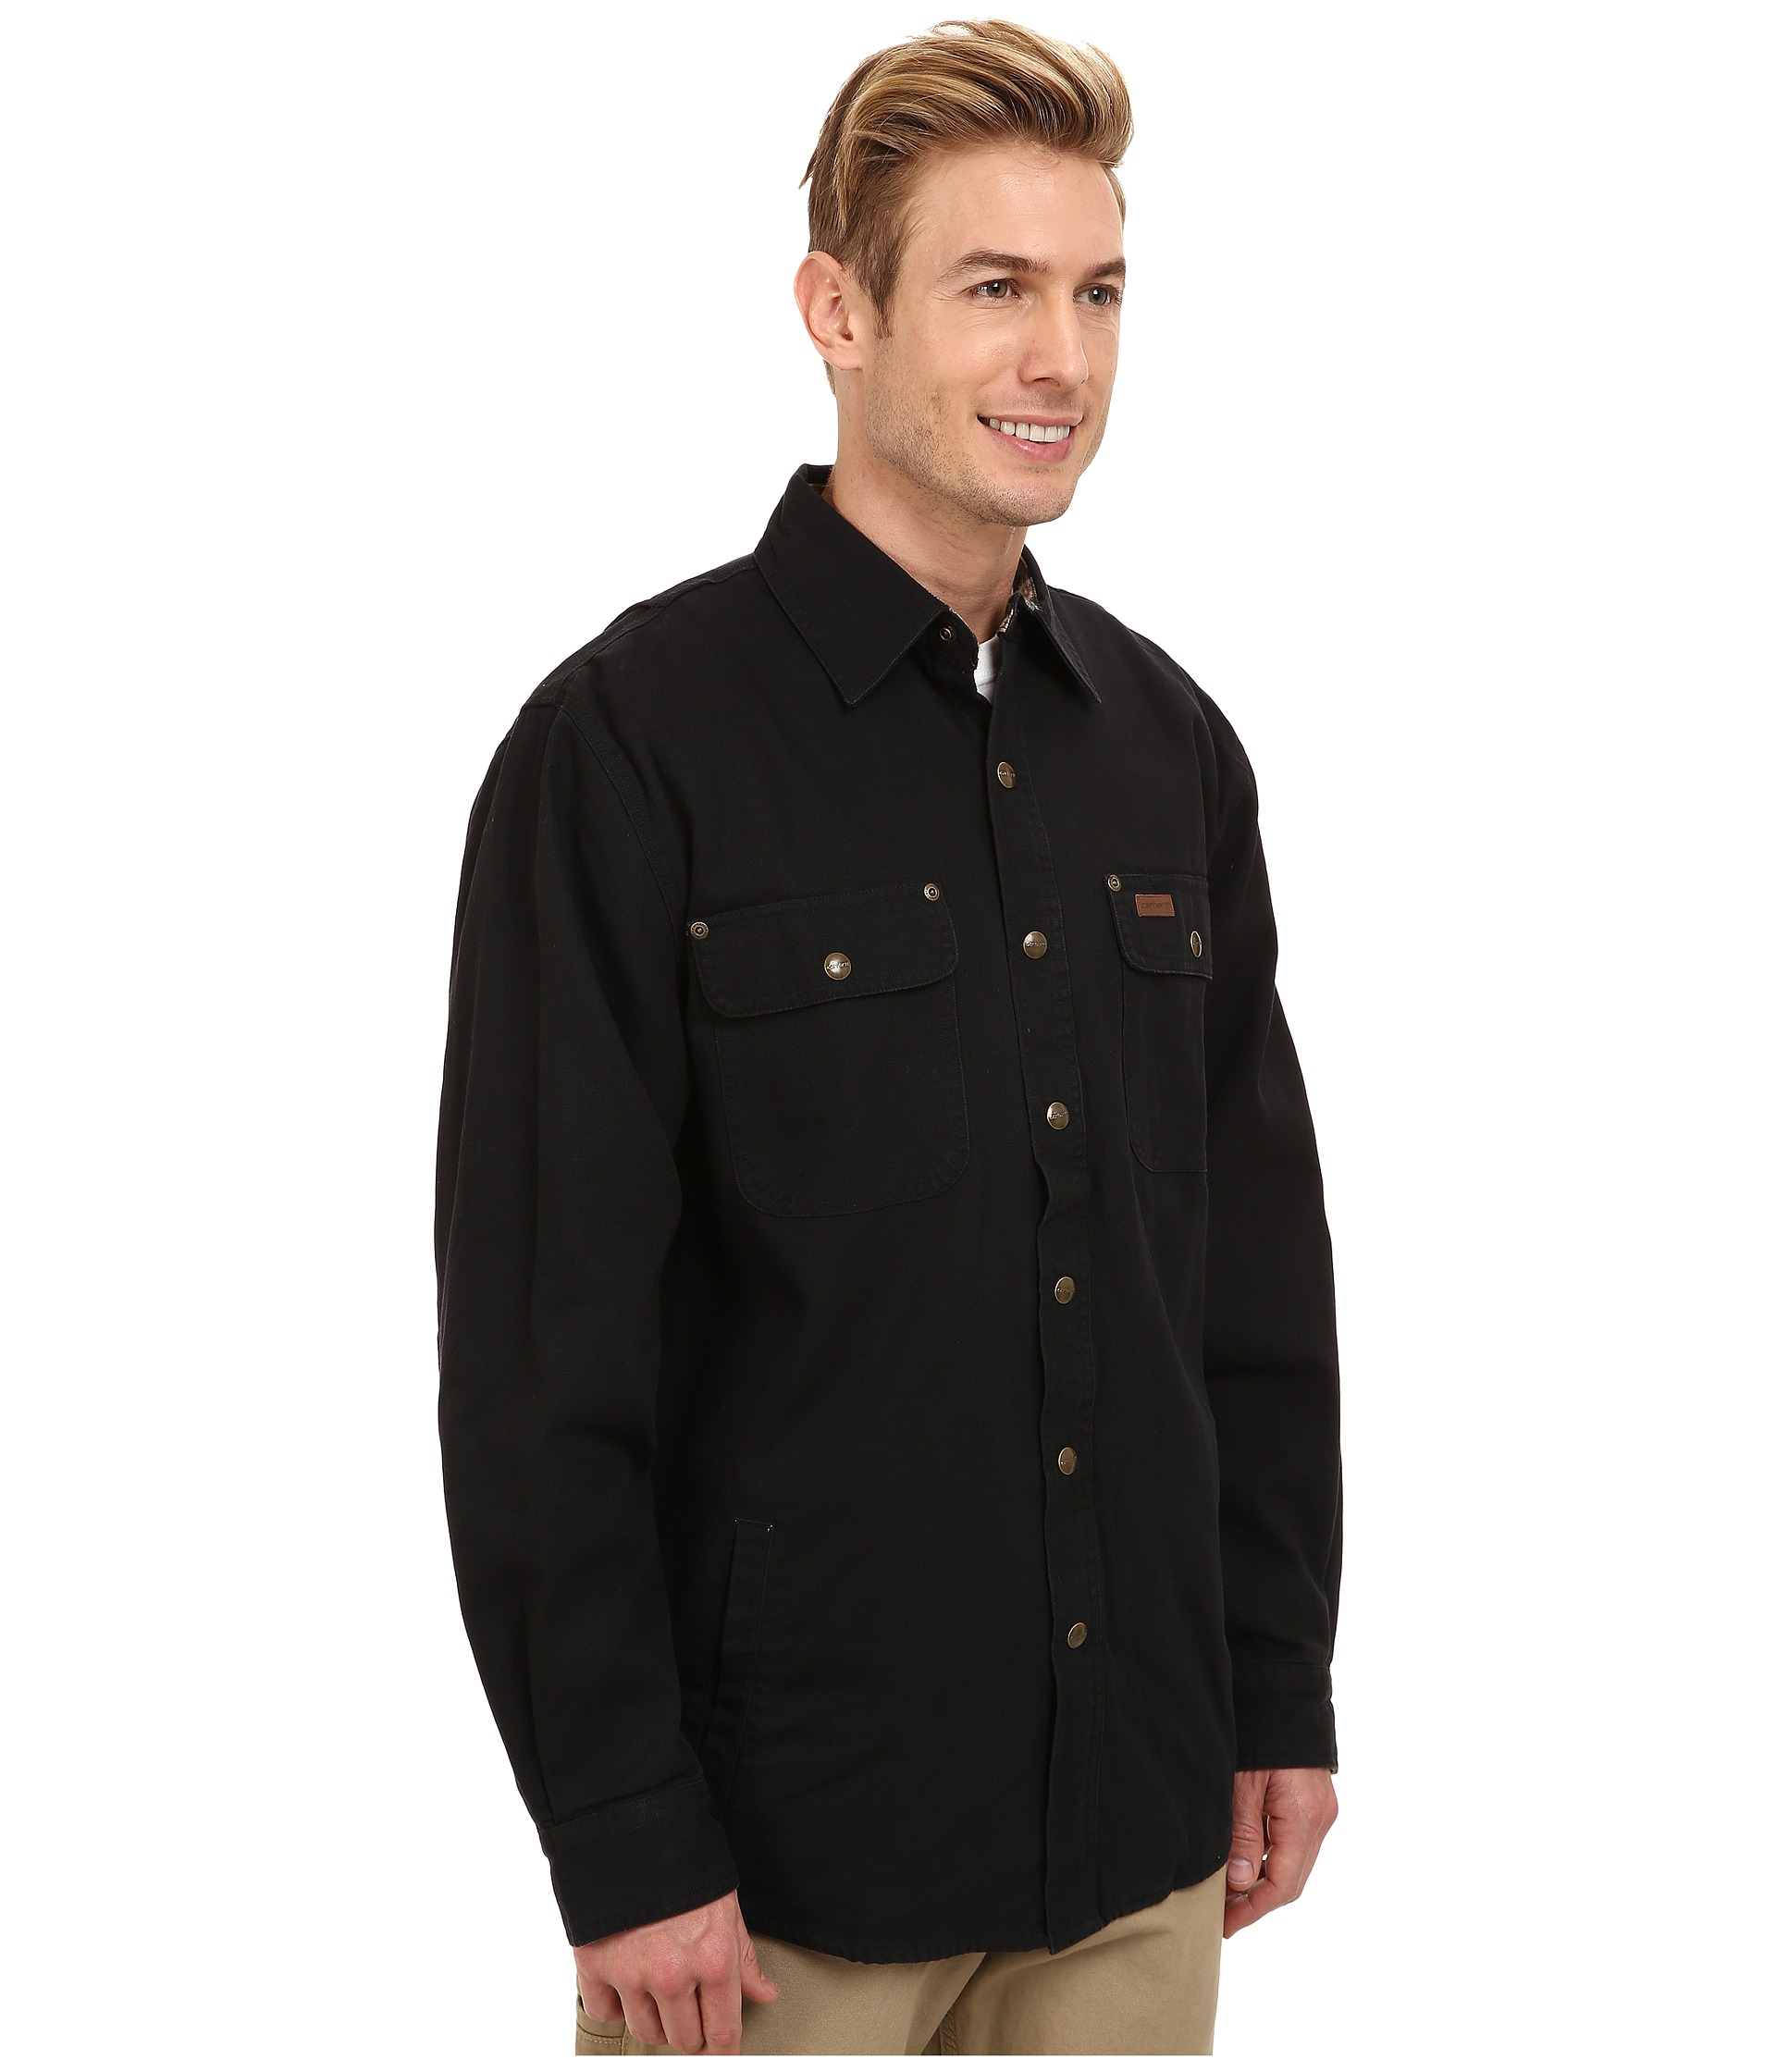 Carhartt Weathered Canvas Shirt Jacket in Black for Men - Lyst